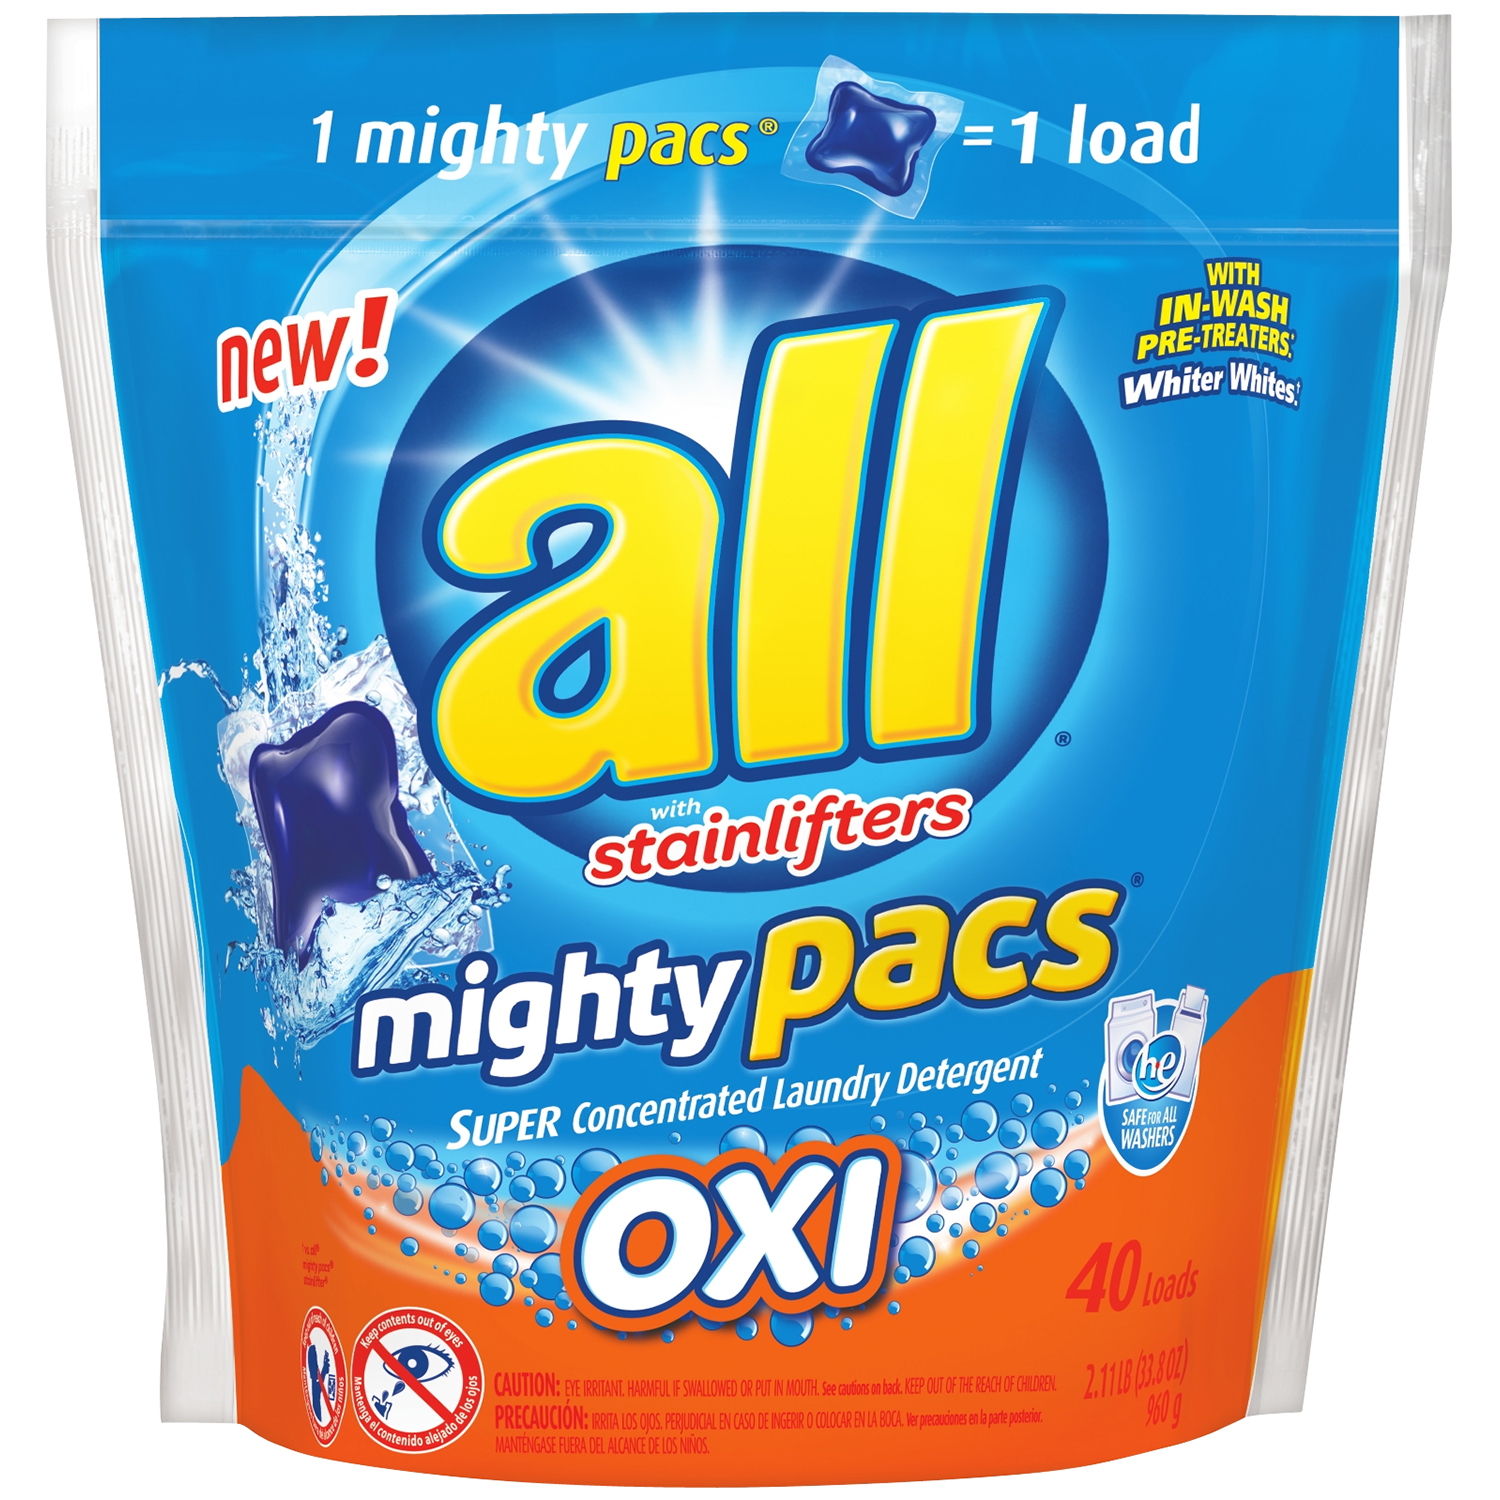 All Laundry detergent with Stainlifters Oxi Mighty Pacs Super Concentrated 40 Loads. 2.11 LB (33.08 OZ) 960g.